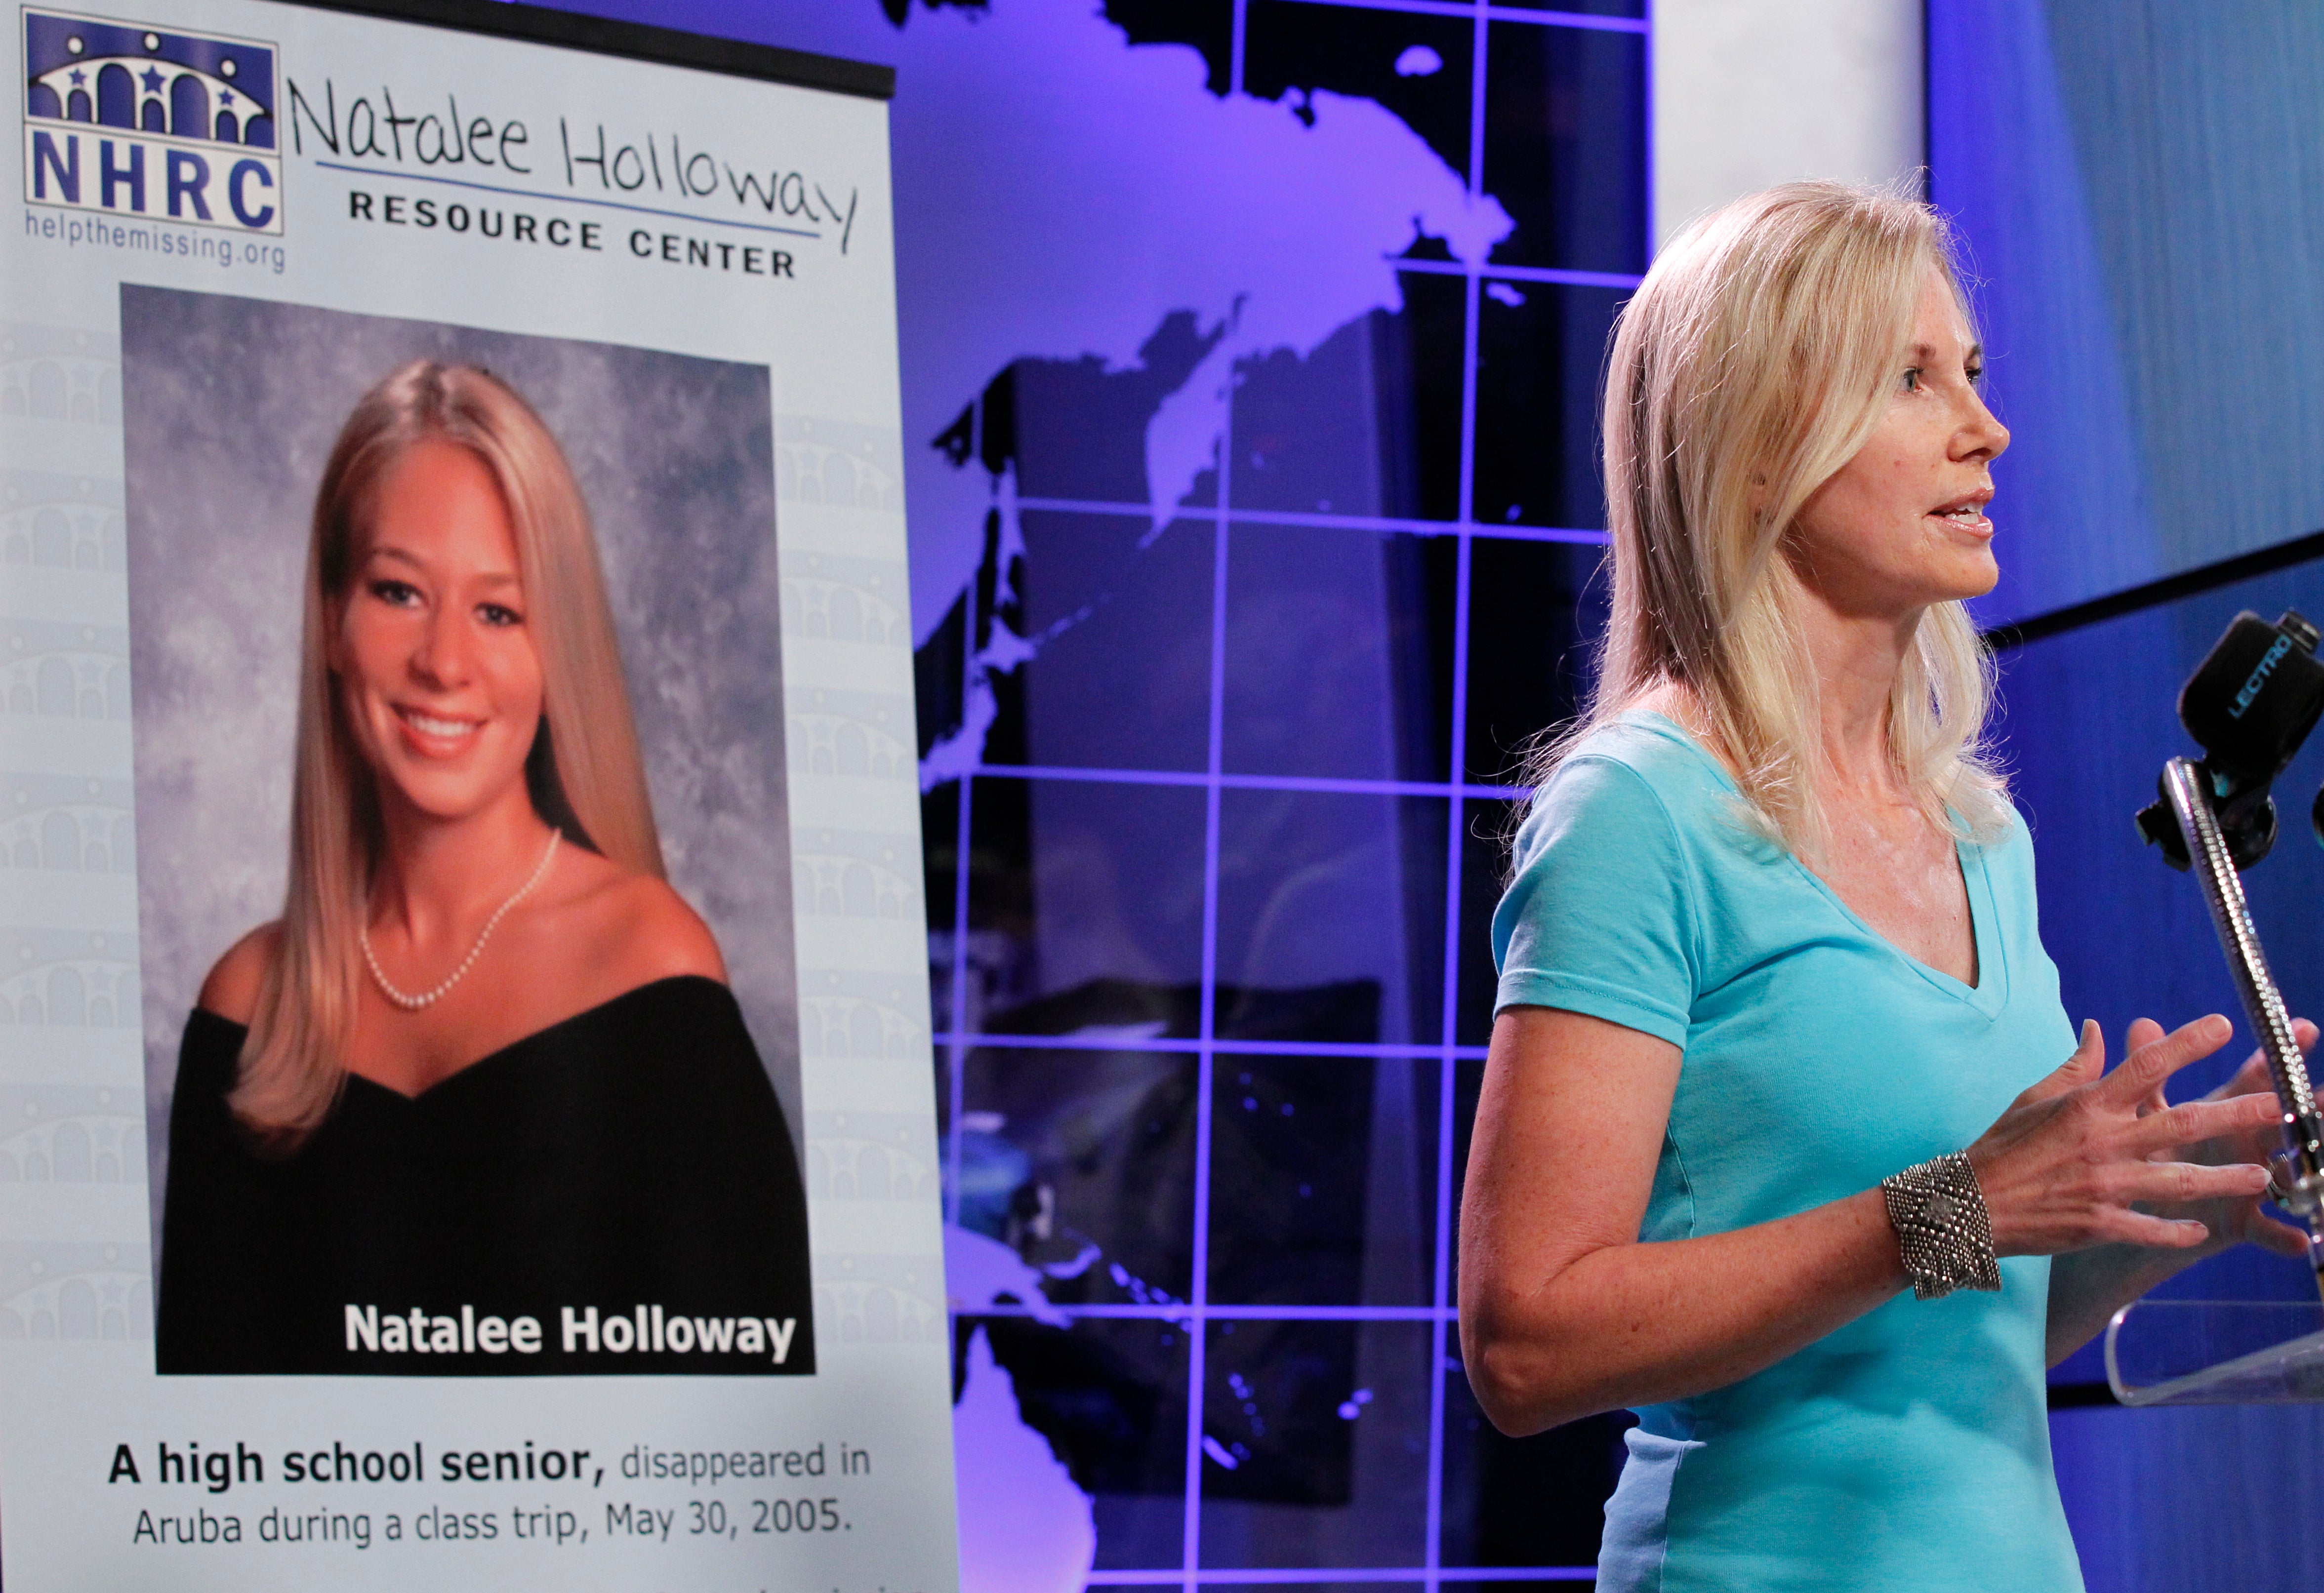 Beth Holloway has sought justice for her daughter ever since her disappearance in 2005